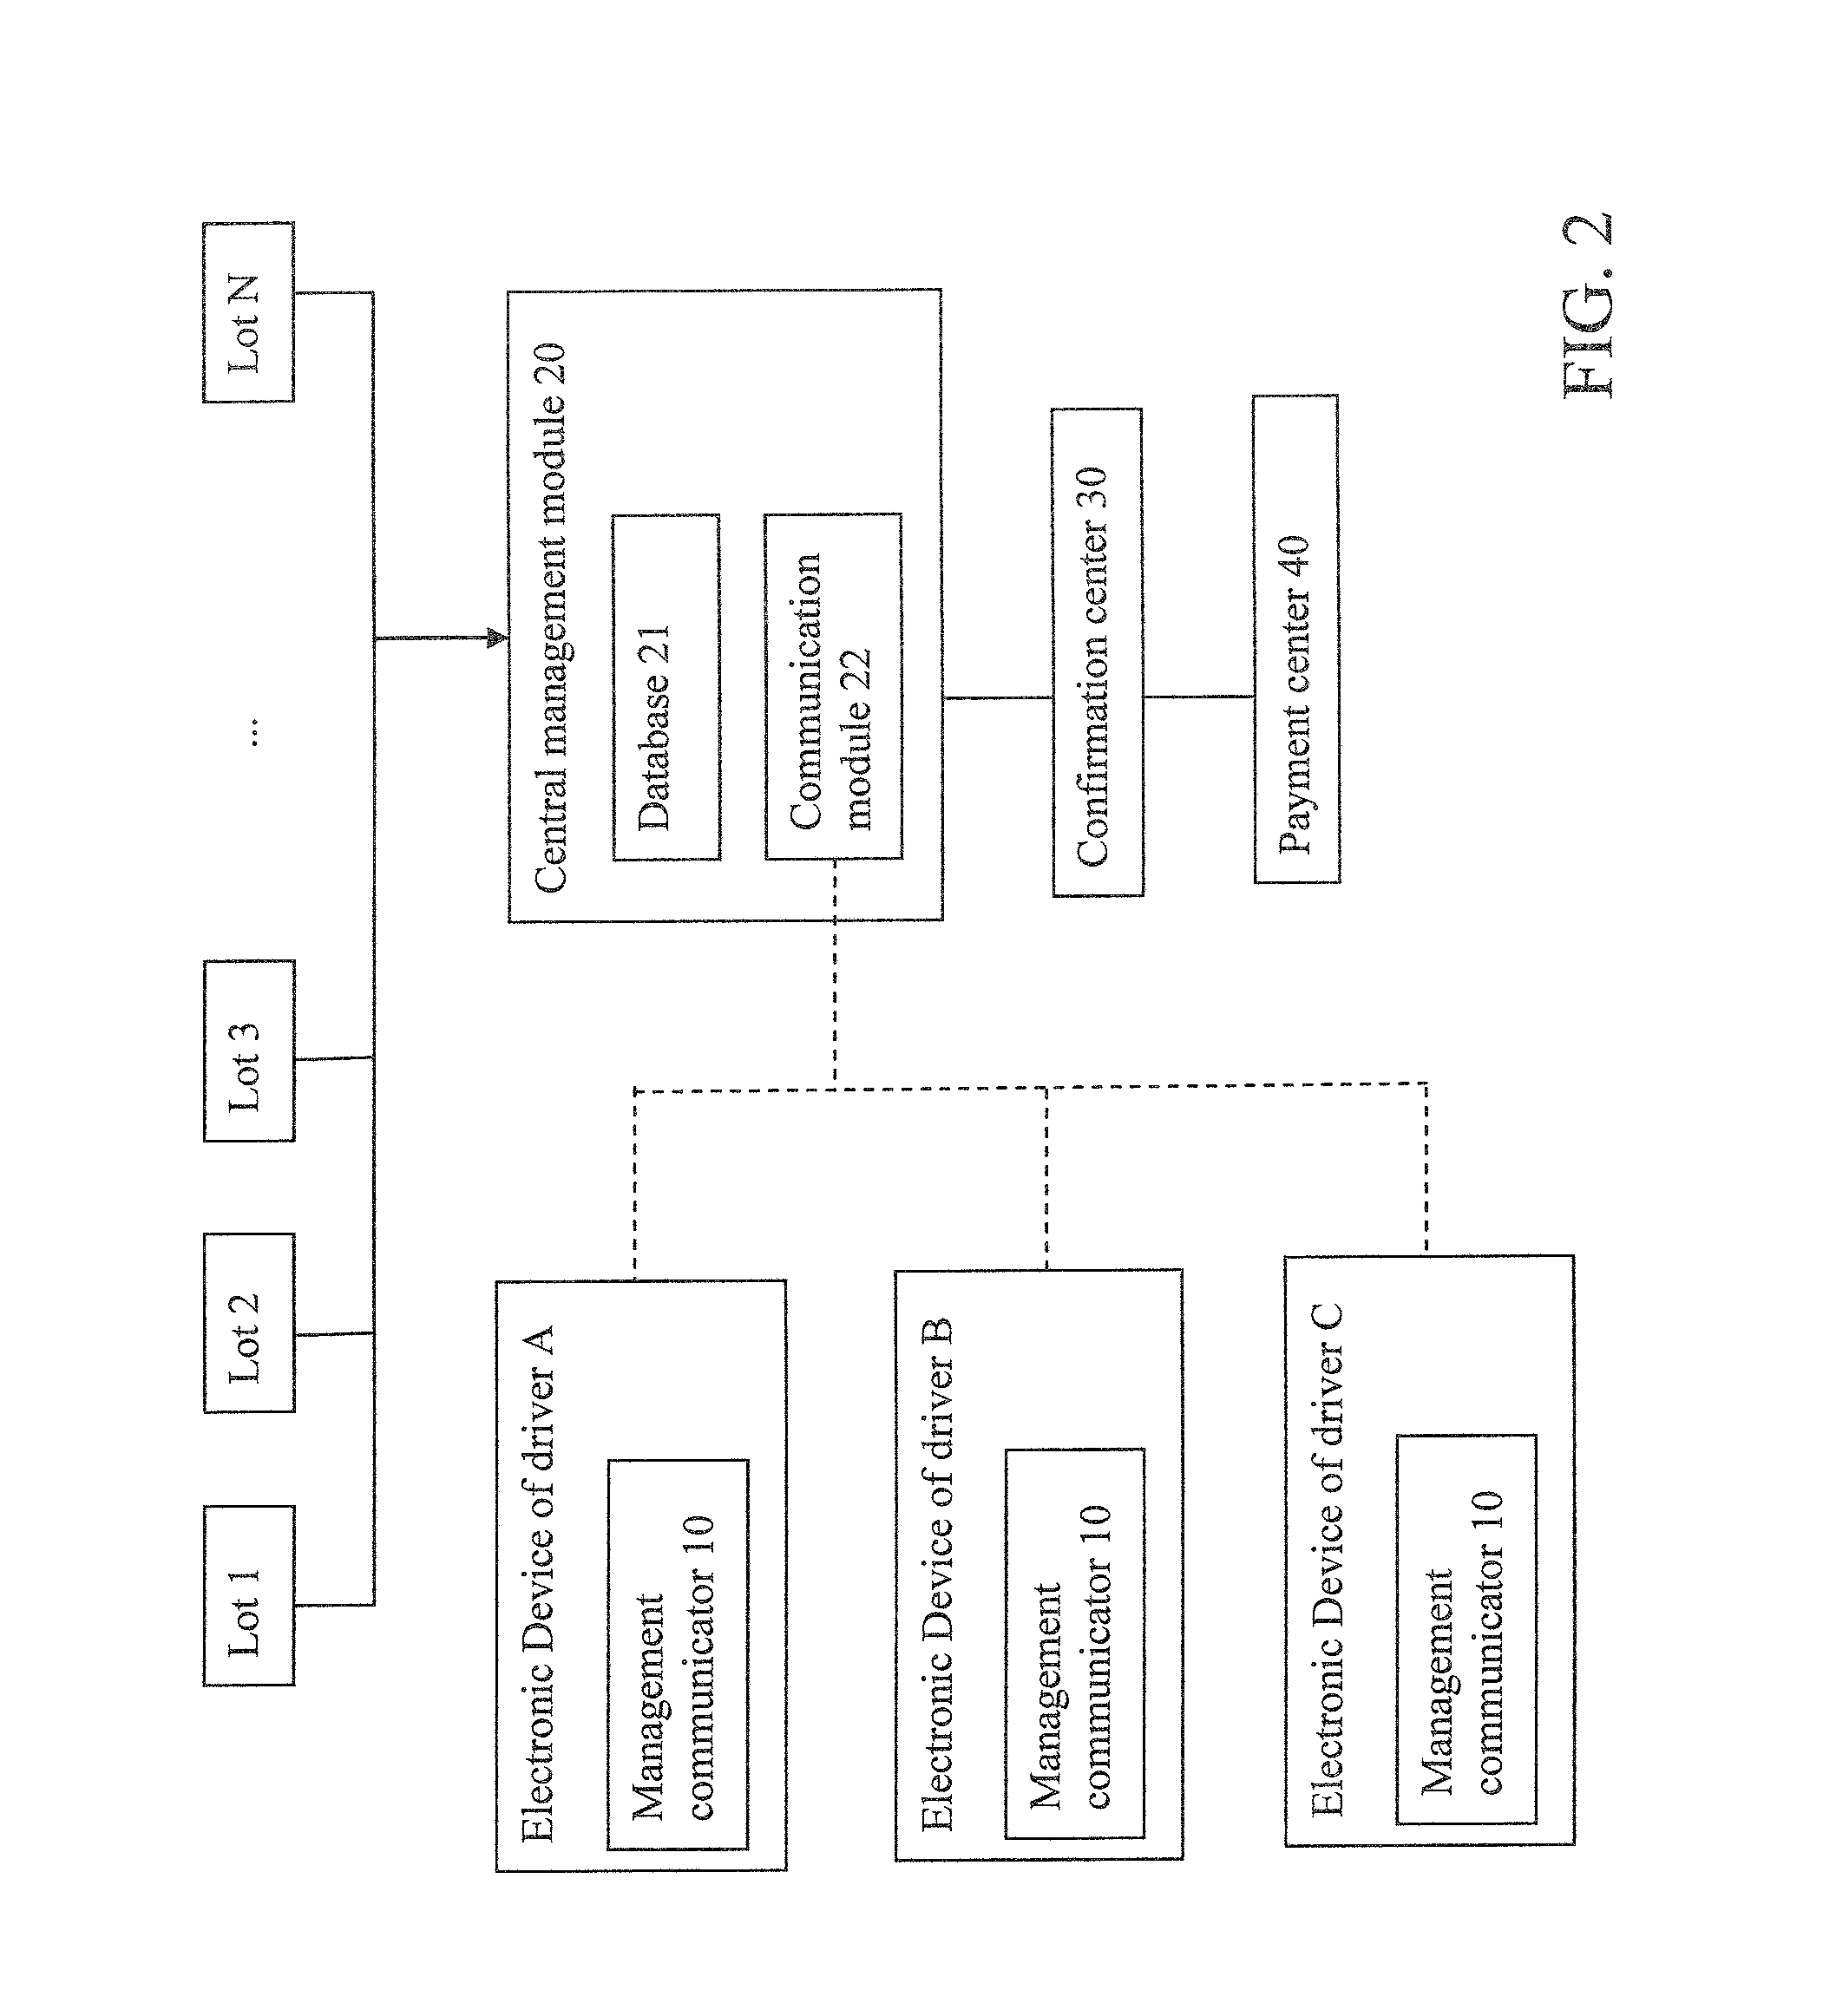 Method and System of Locating and Managing Parking Space